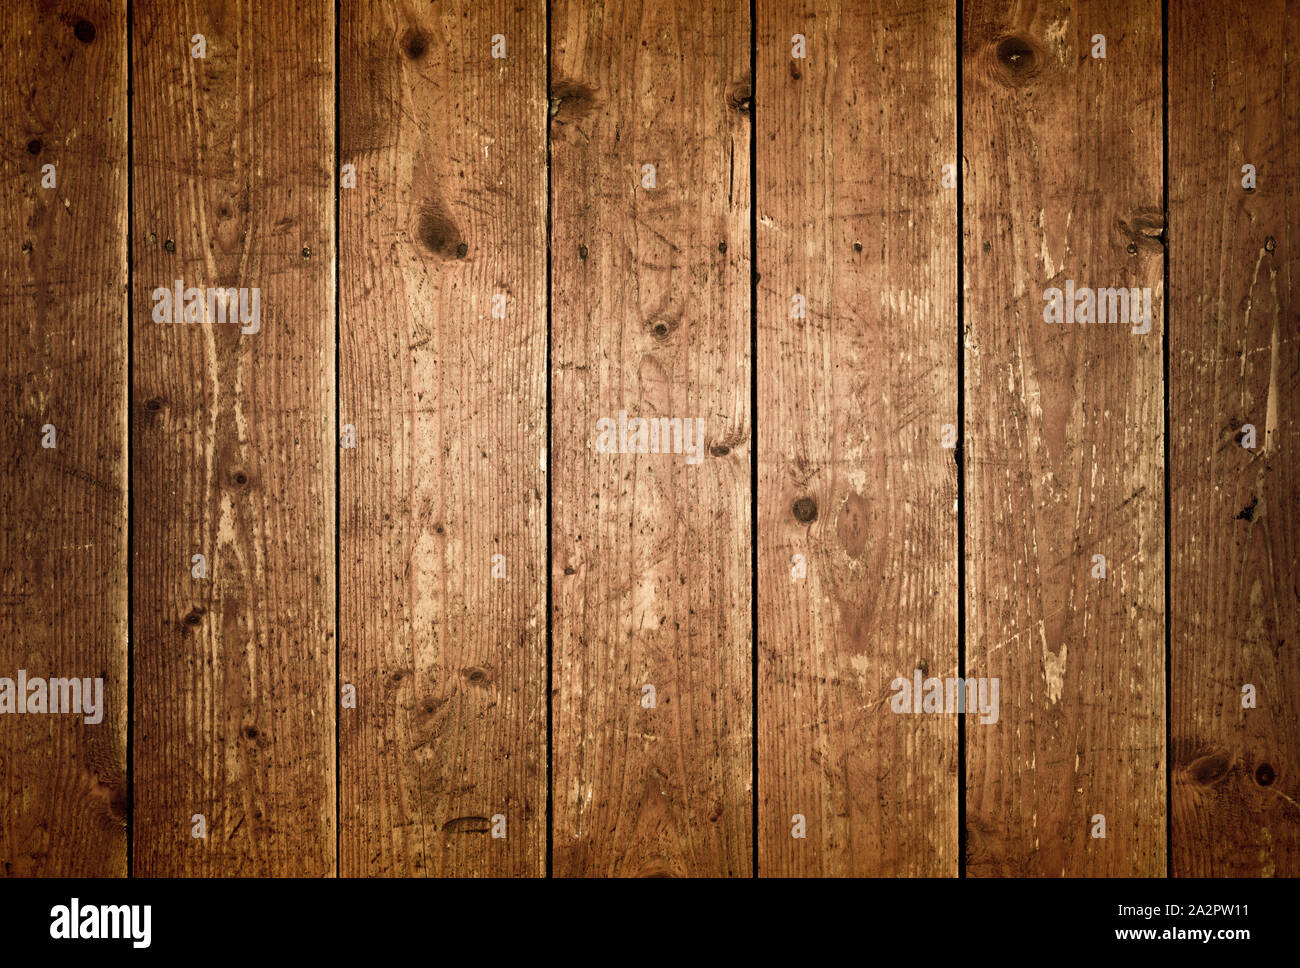 Rustic wood planks background, wood texture Stock Photo